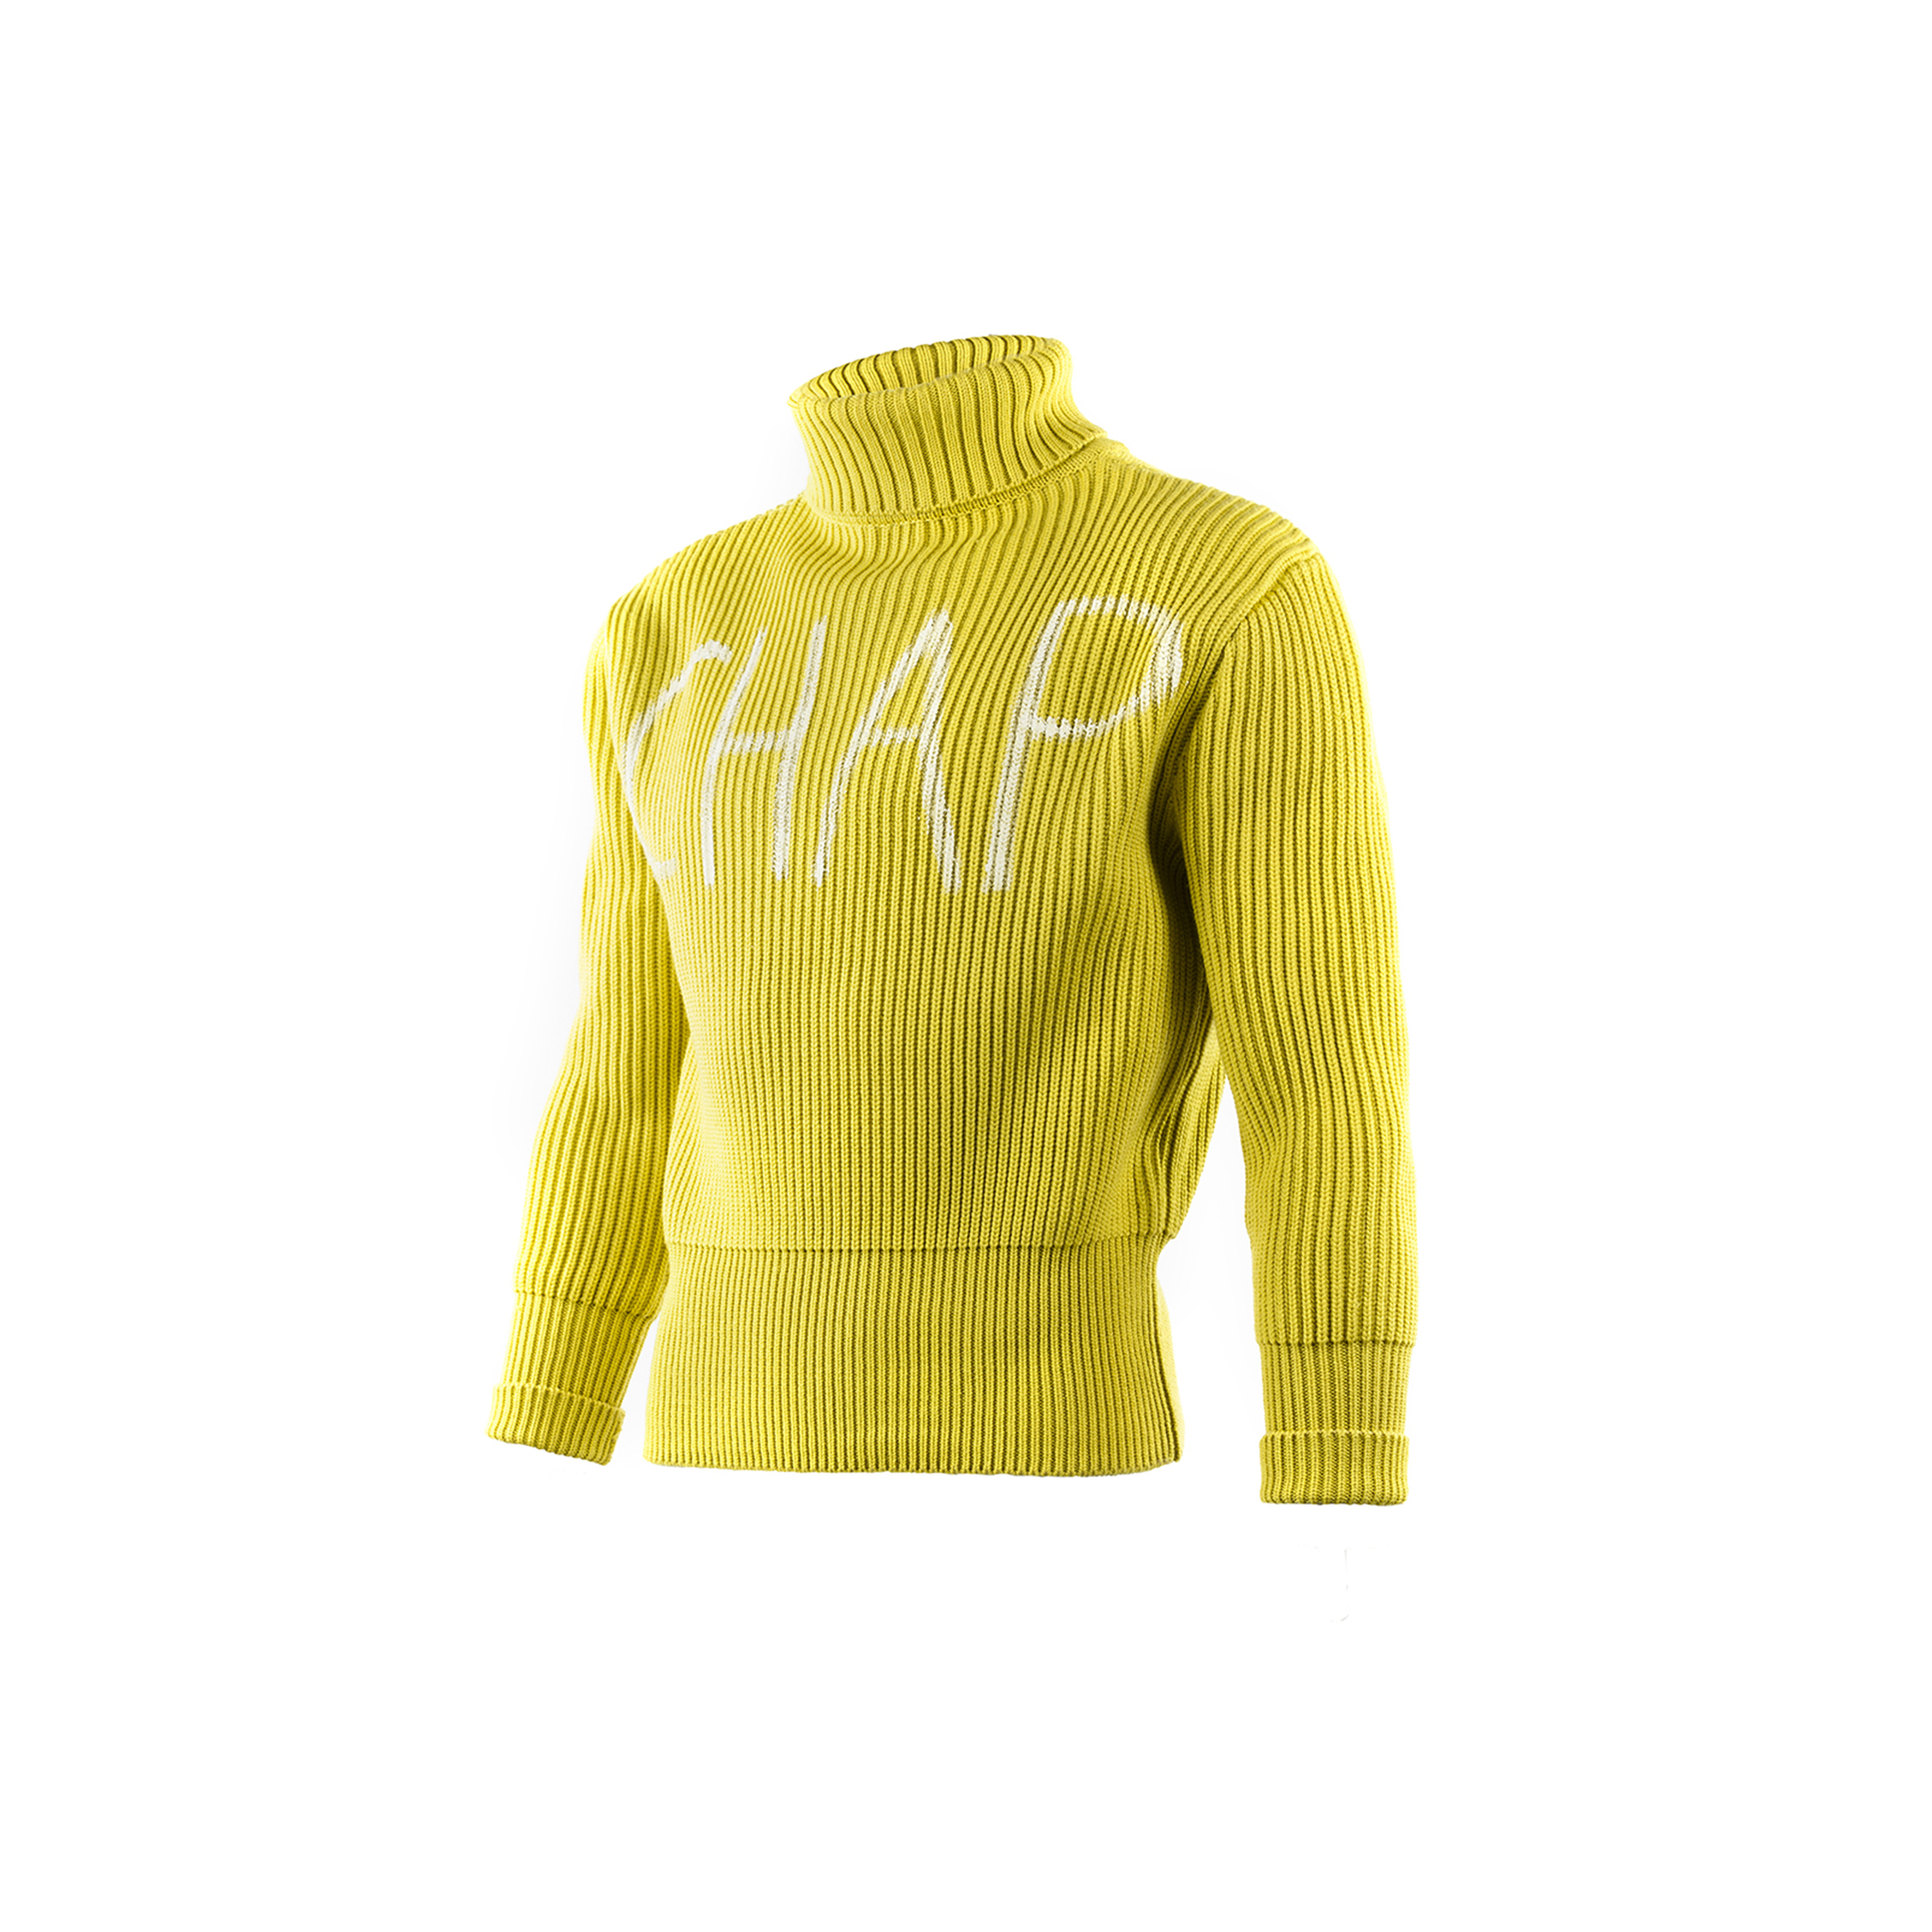 Nuvolari Jumper - Wool and acrylic - Yellow color